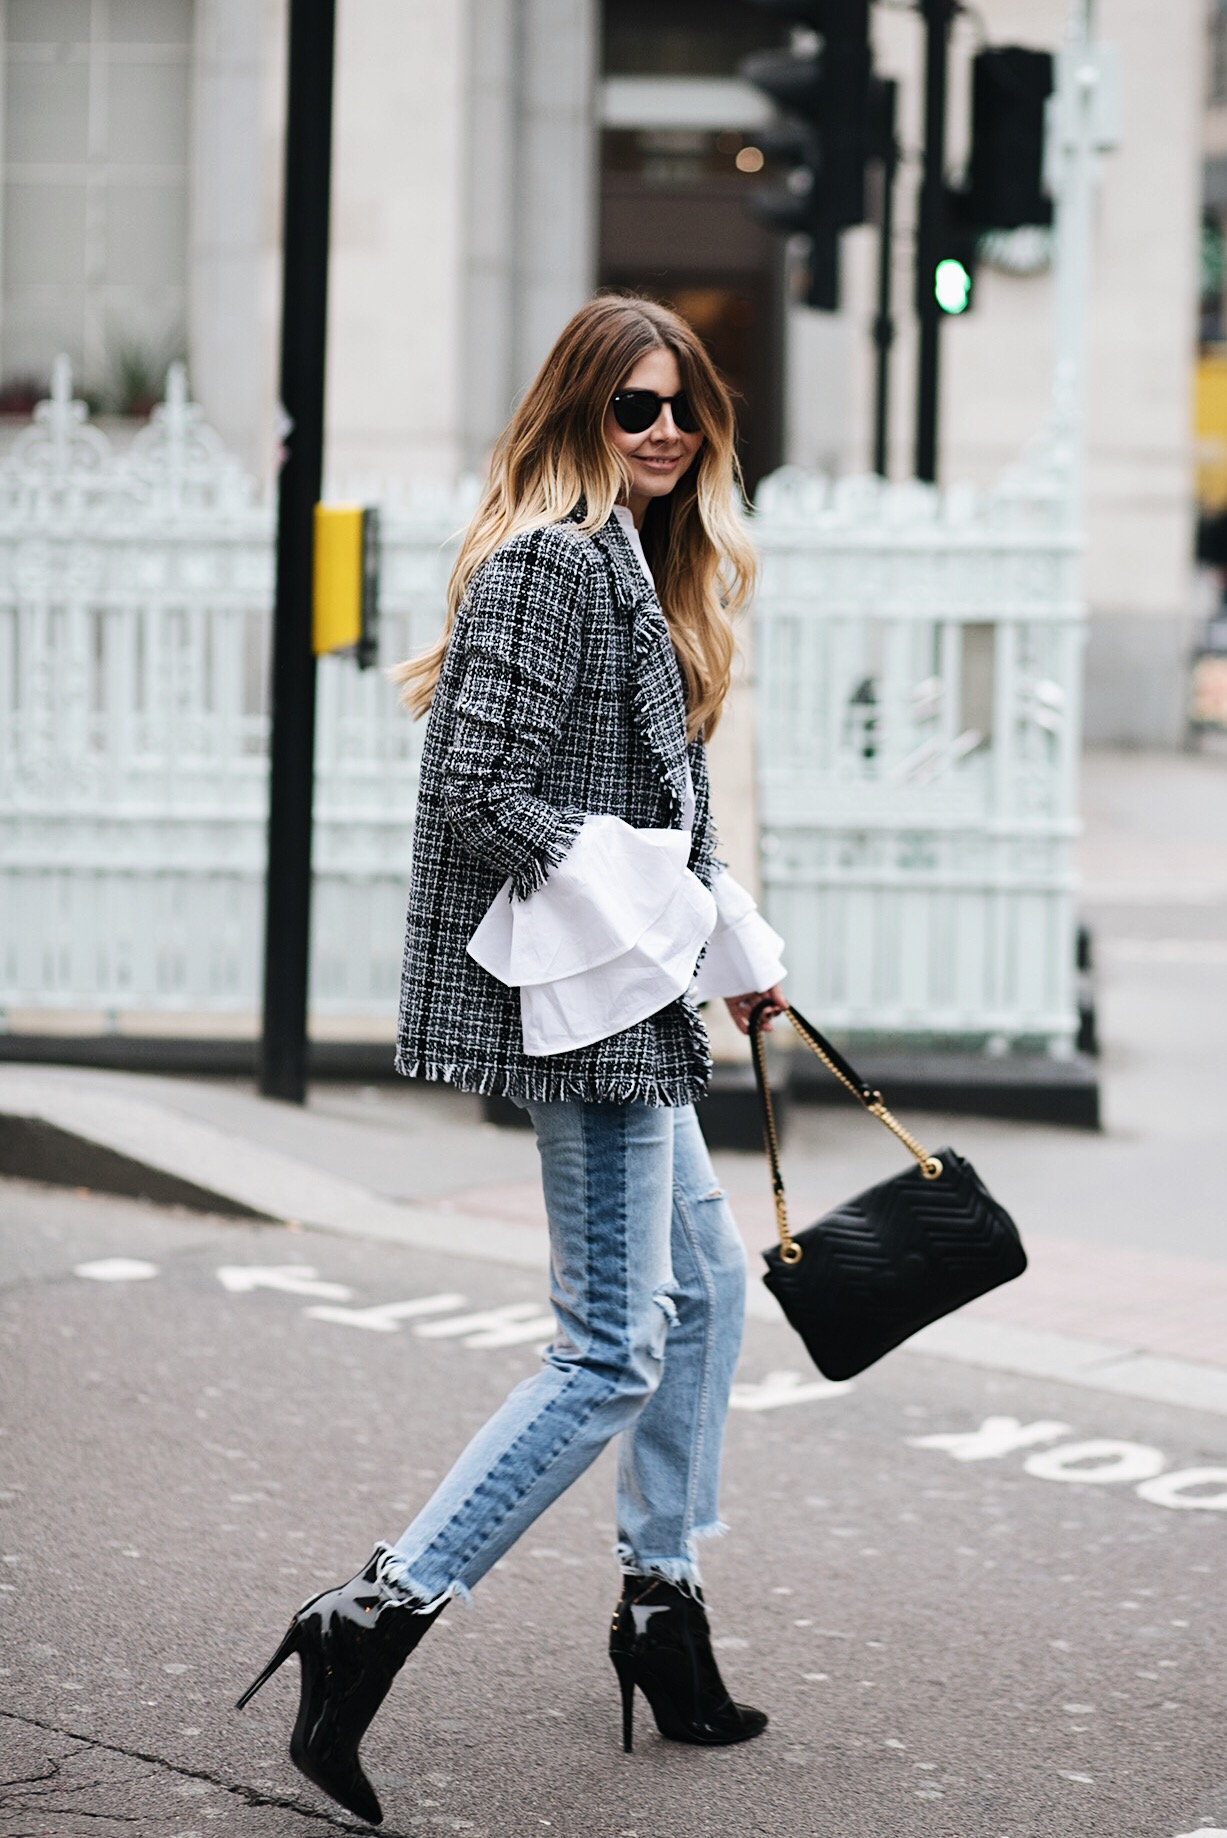 Emma Hill (EJStyle) wears boucle tweed blazer, flare ruffle cuff white shirt, light wash denim stepped hem frayed jeans, Gucci Marmont bag, black pic vinyl ankle boots, London street style